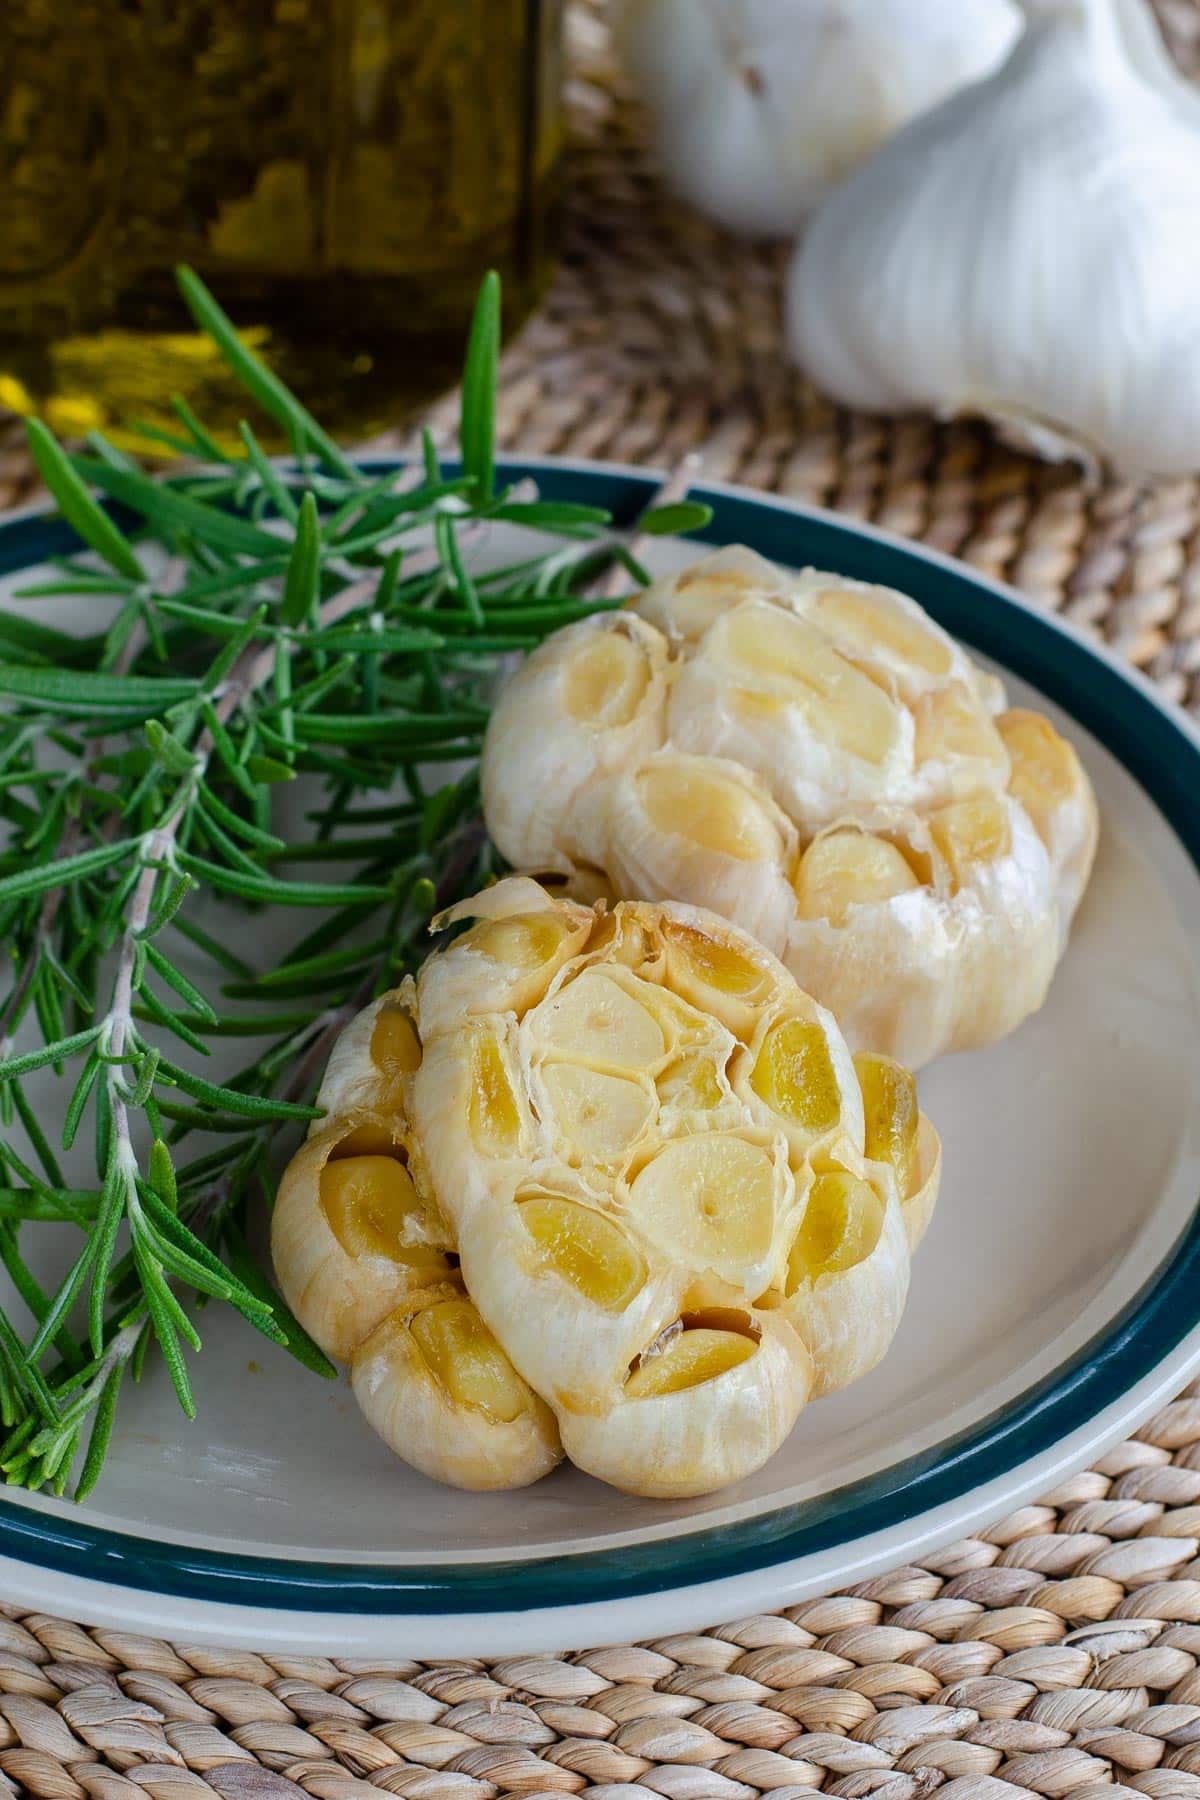 Roasted garlic heads on plate with rosemary, olive oil and whole bulbs in background